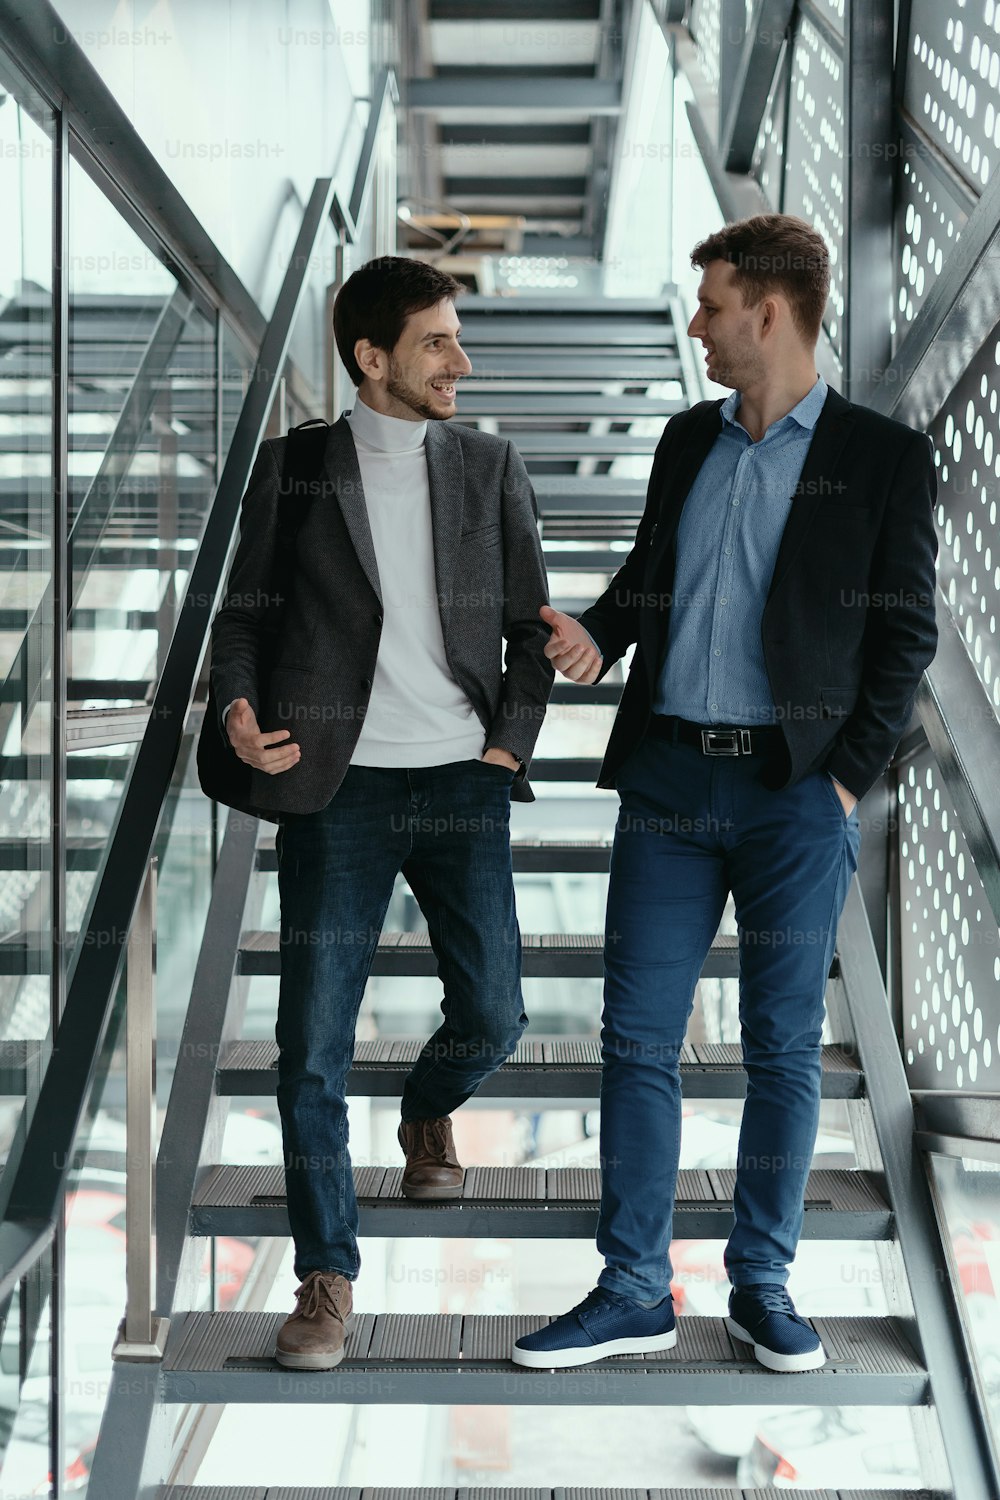 Two young businessmen going up, down the stairs while chatting in a modern building.